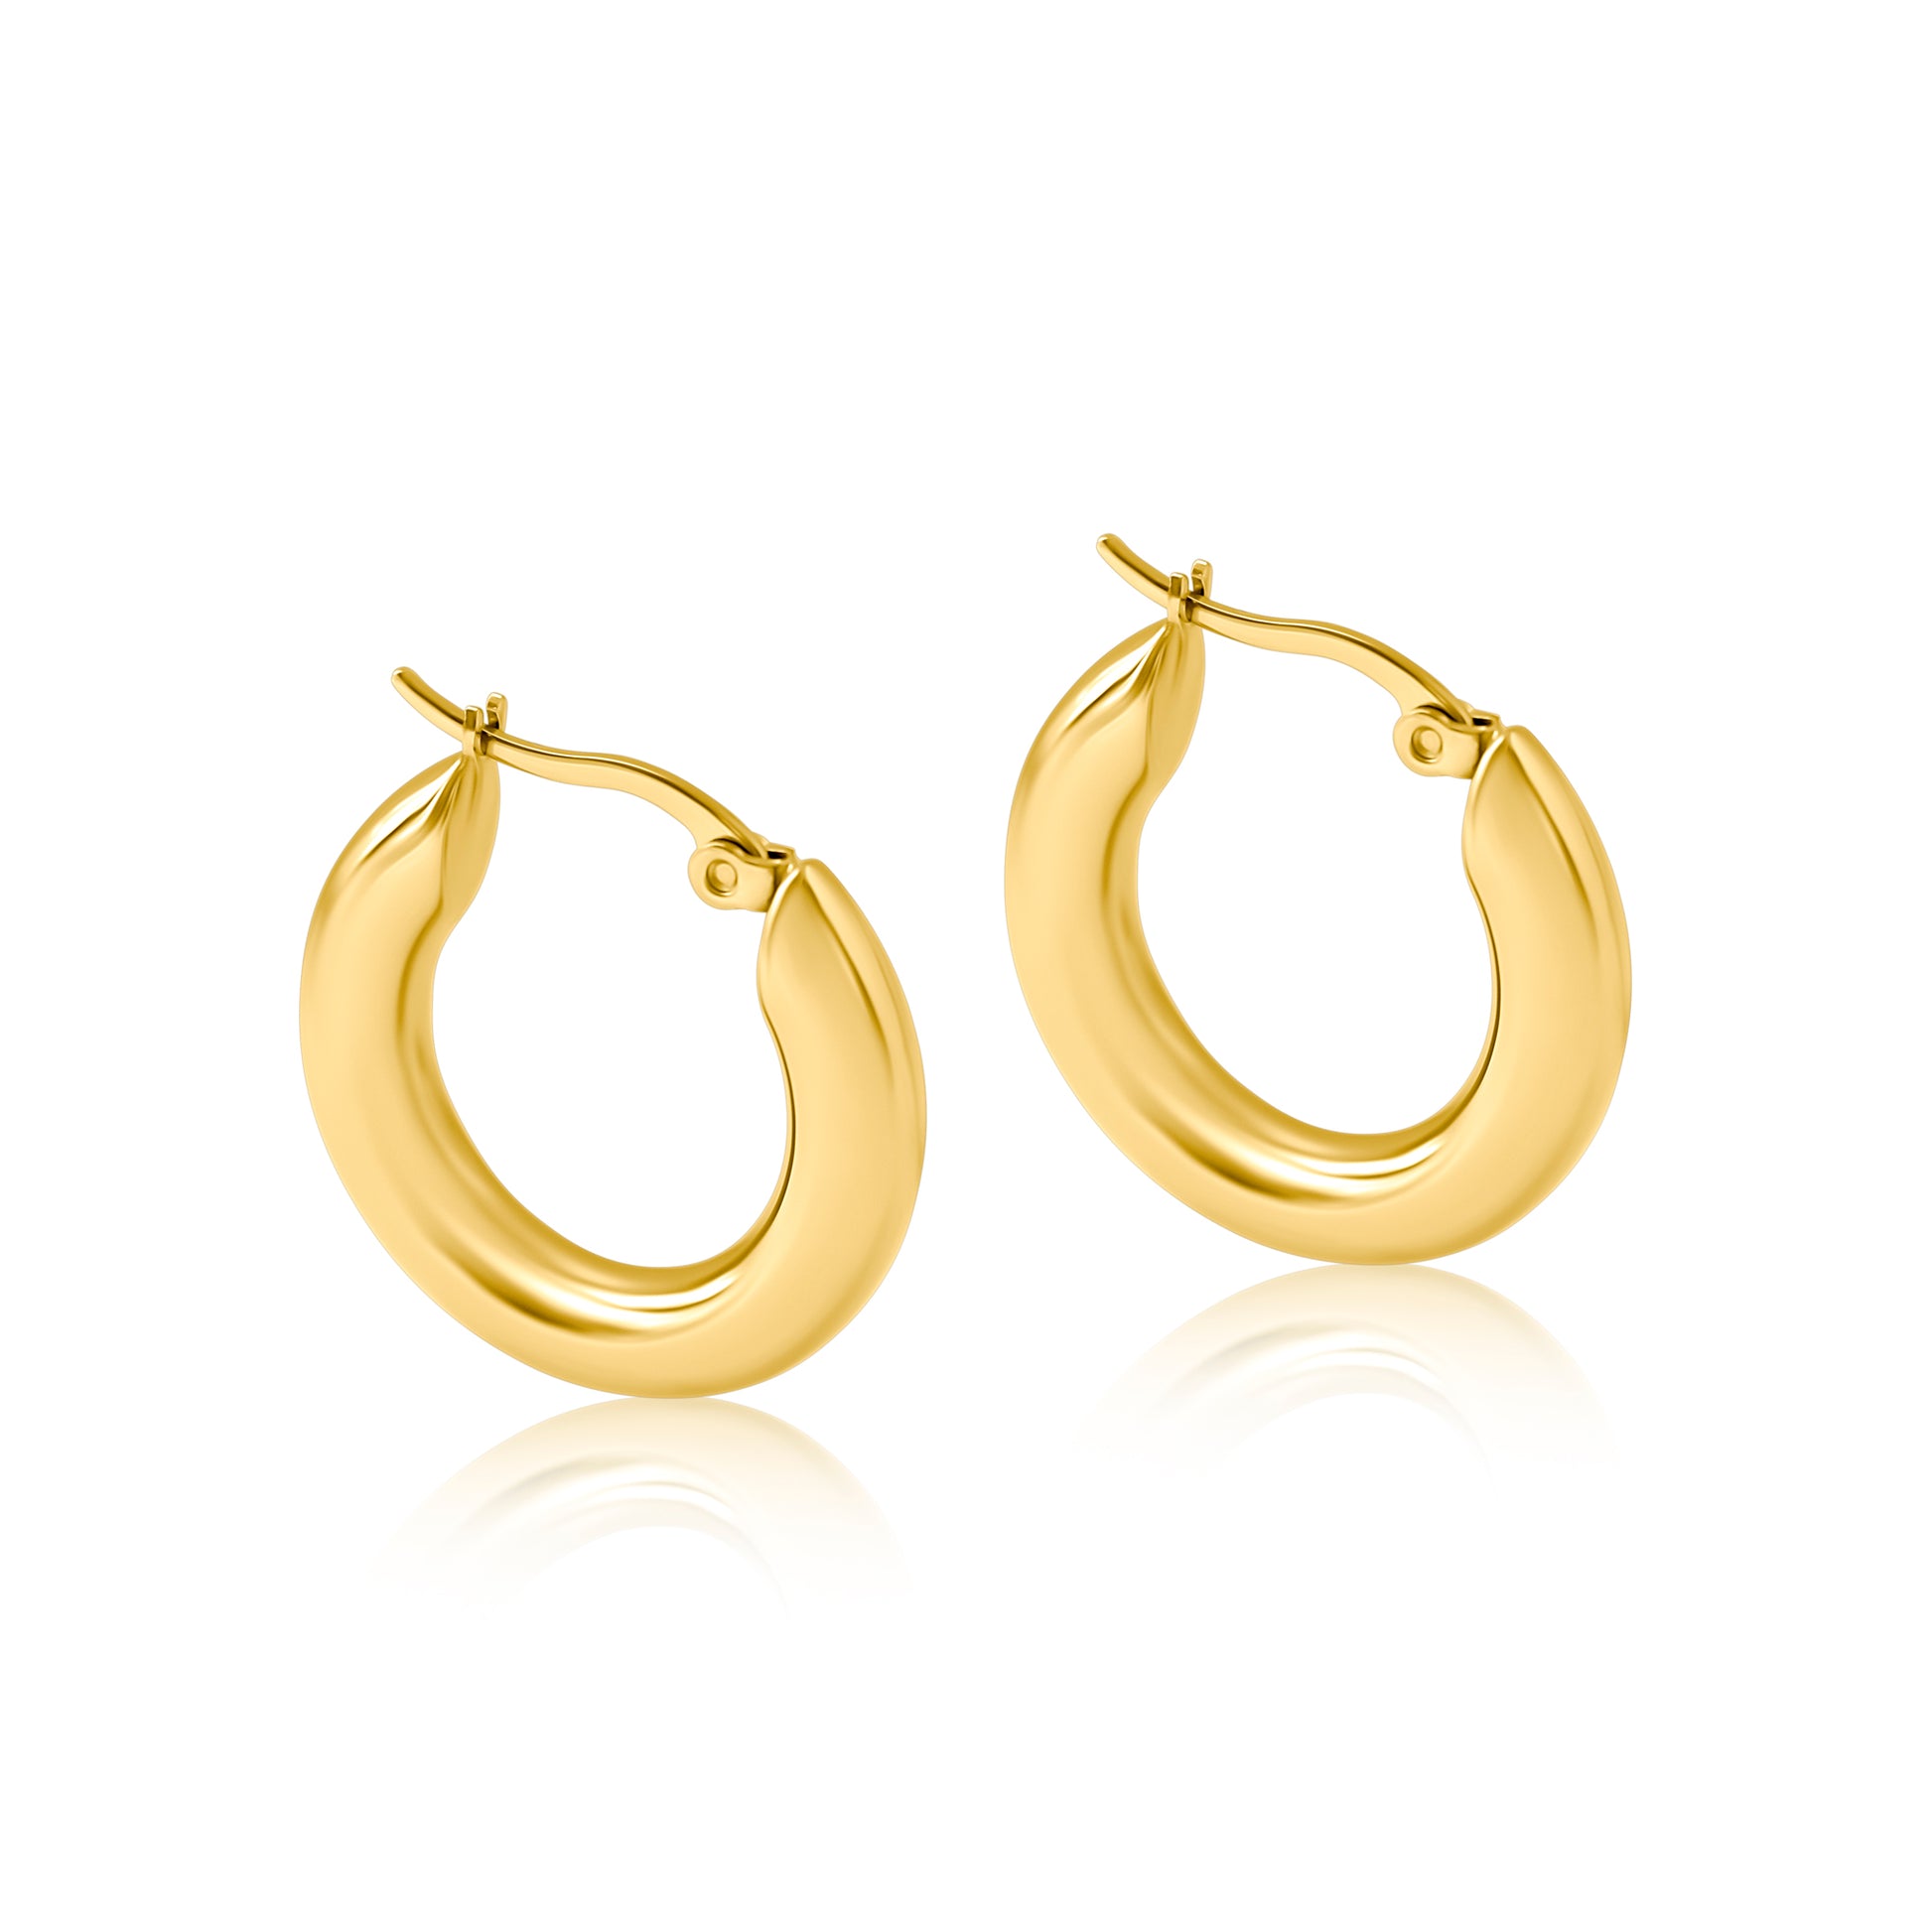 Stylish 18K Gold Plated Classic Hoop Earrings, Hypoallergenic and Waterproof Fashion Jewelry for Women. B-Xquisite Jewelry Earrings